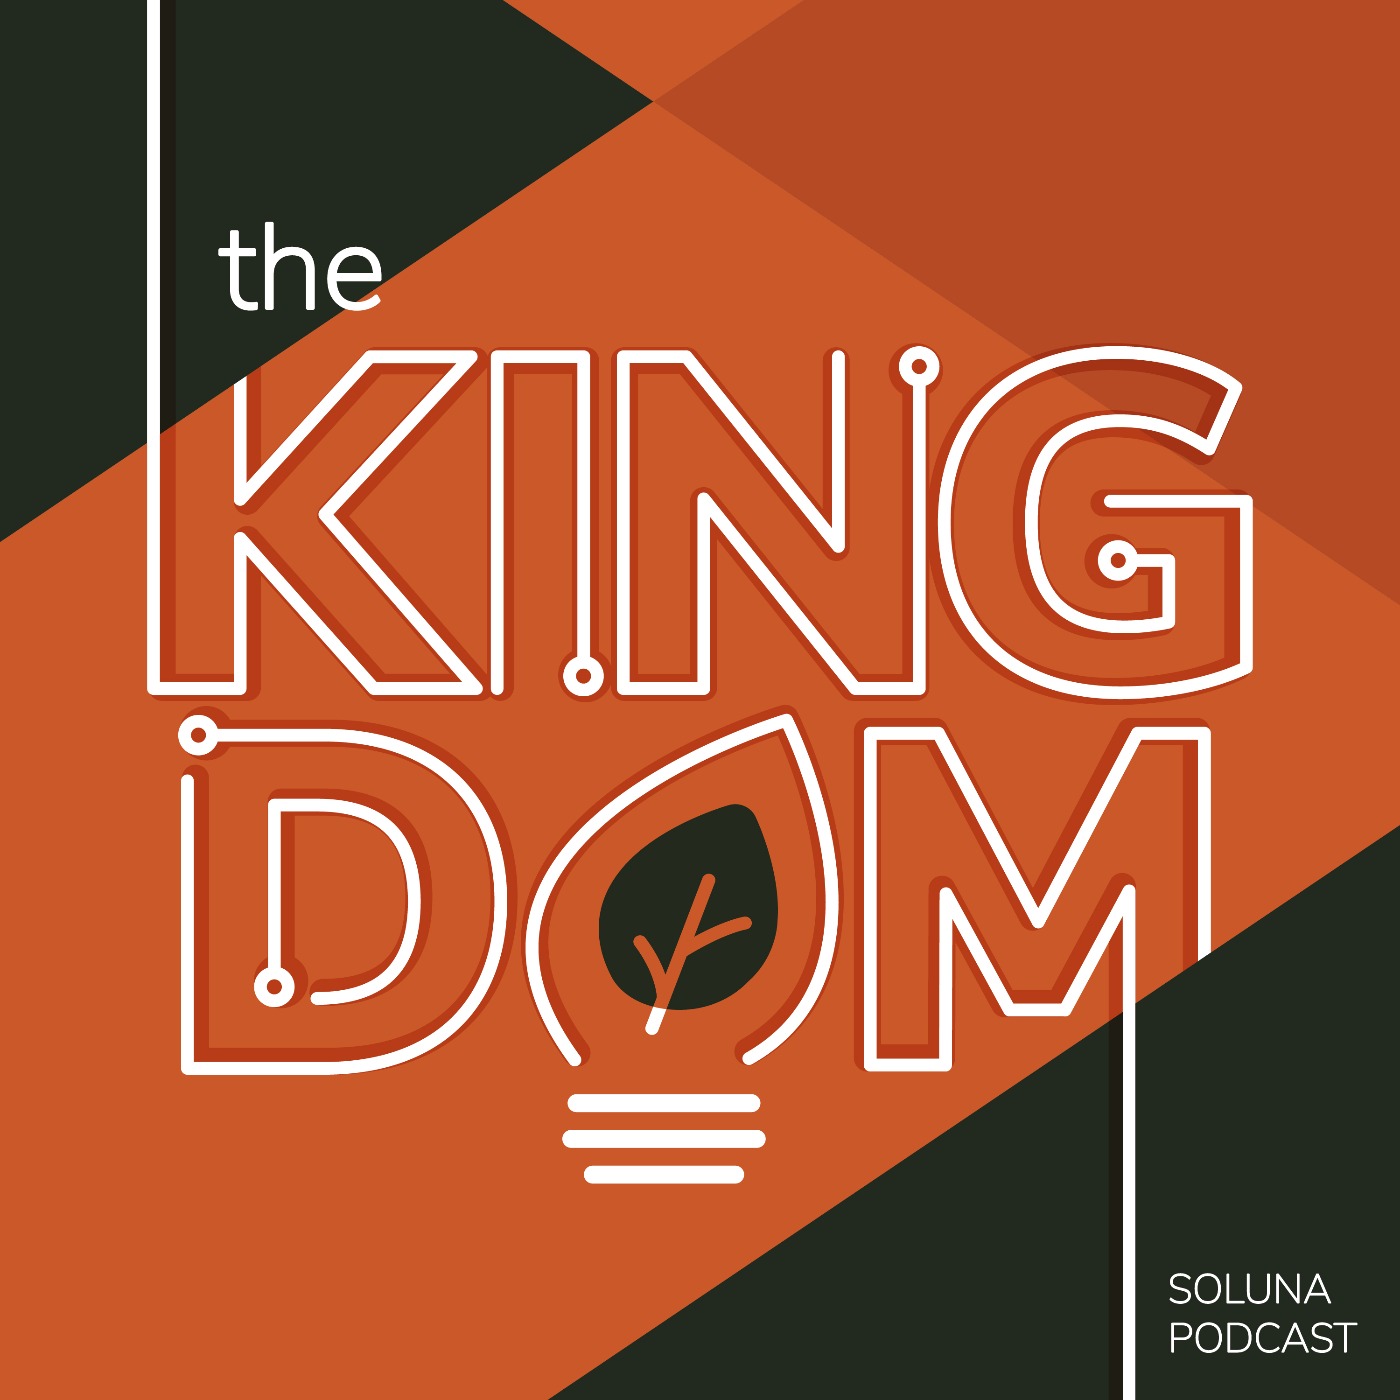 The Kingdom Episode 30: Why Bitcoin? with Andy Edstrom